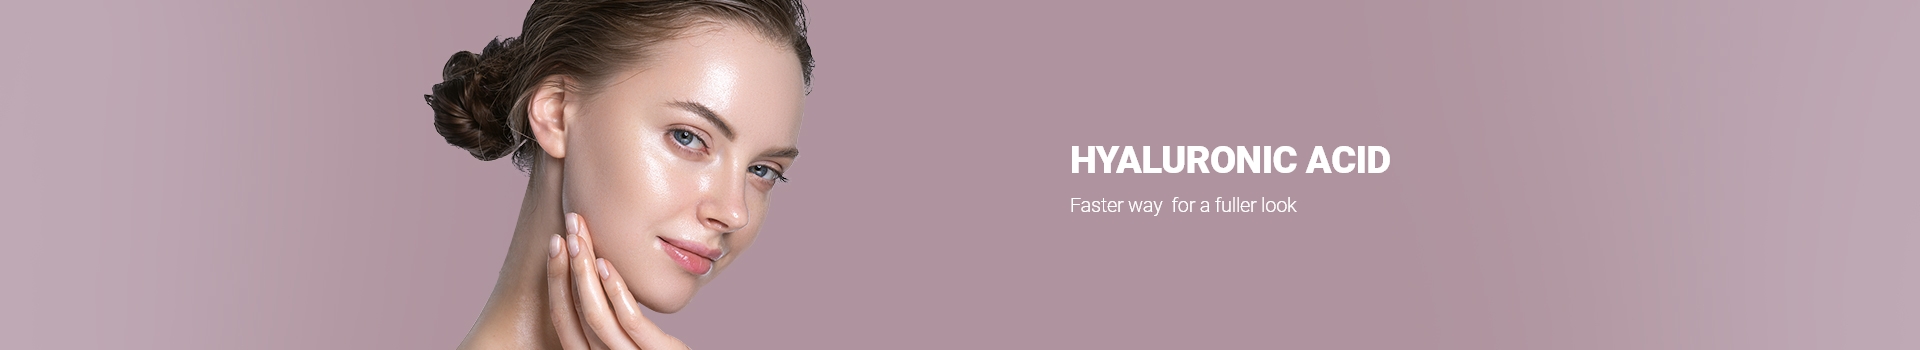 HYALURONIC ACID Faster way  for a fuller look